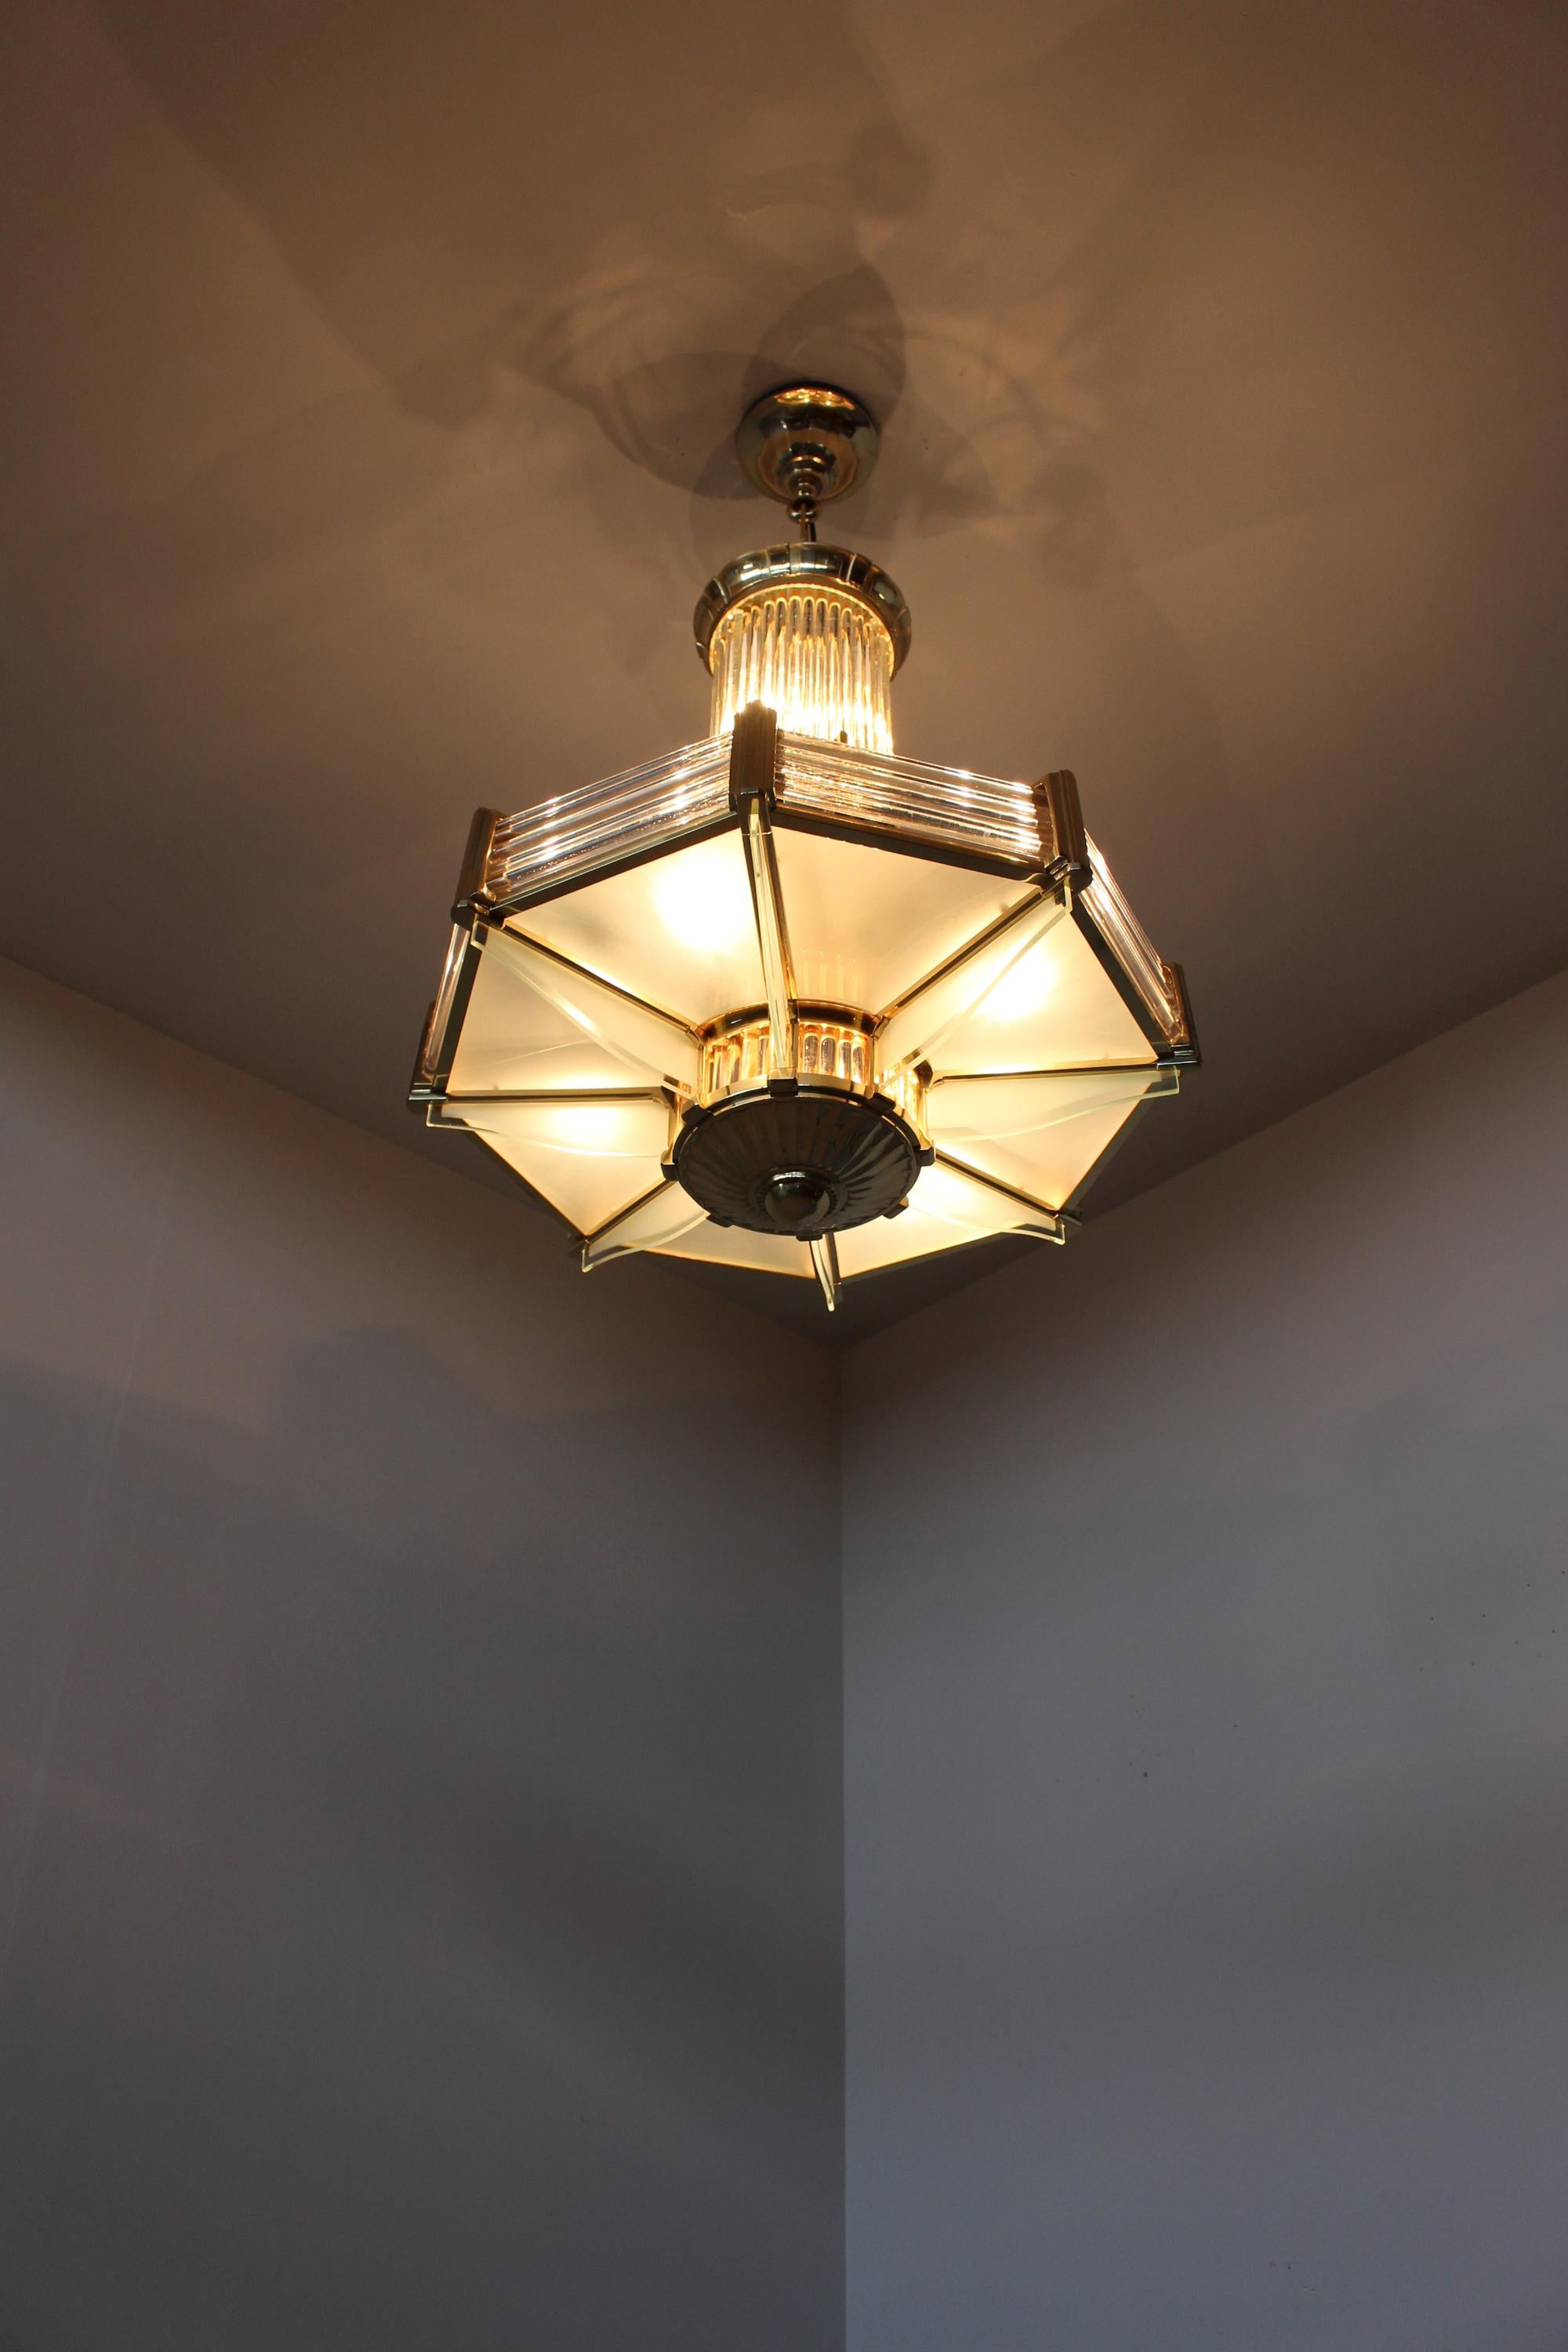 A Fine French Art Deco Octagonal Bronze and Glass Chandelier by Petitot In Good Condition For Sale In Long Island City, NY